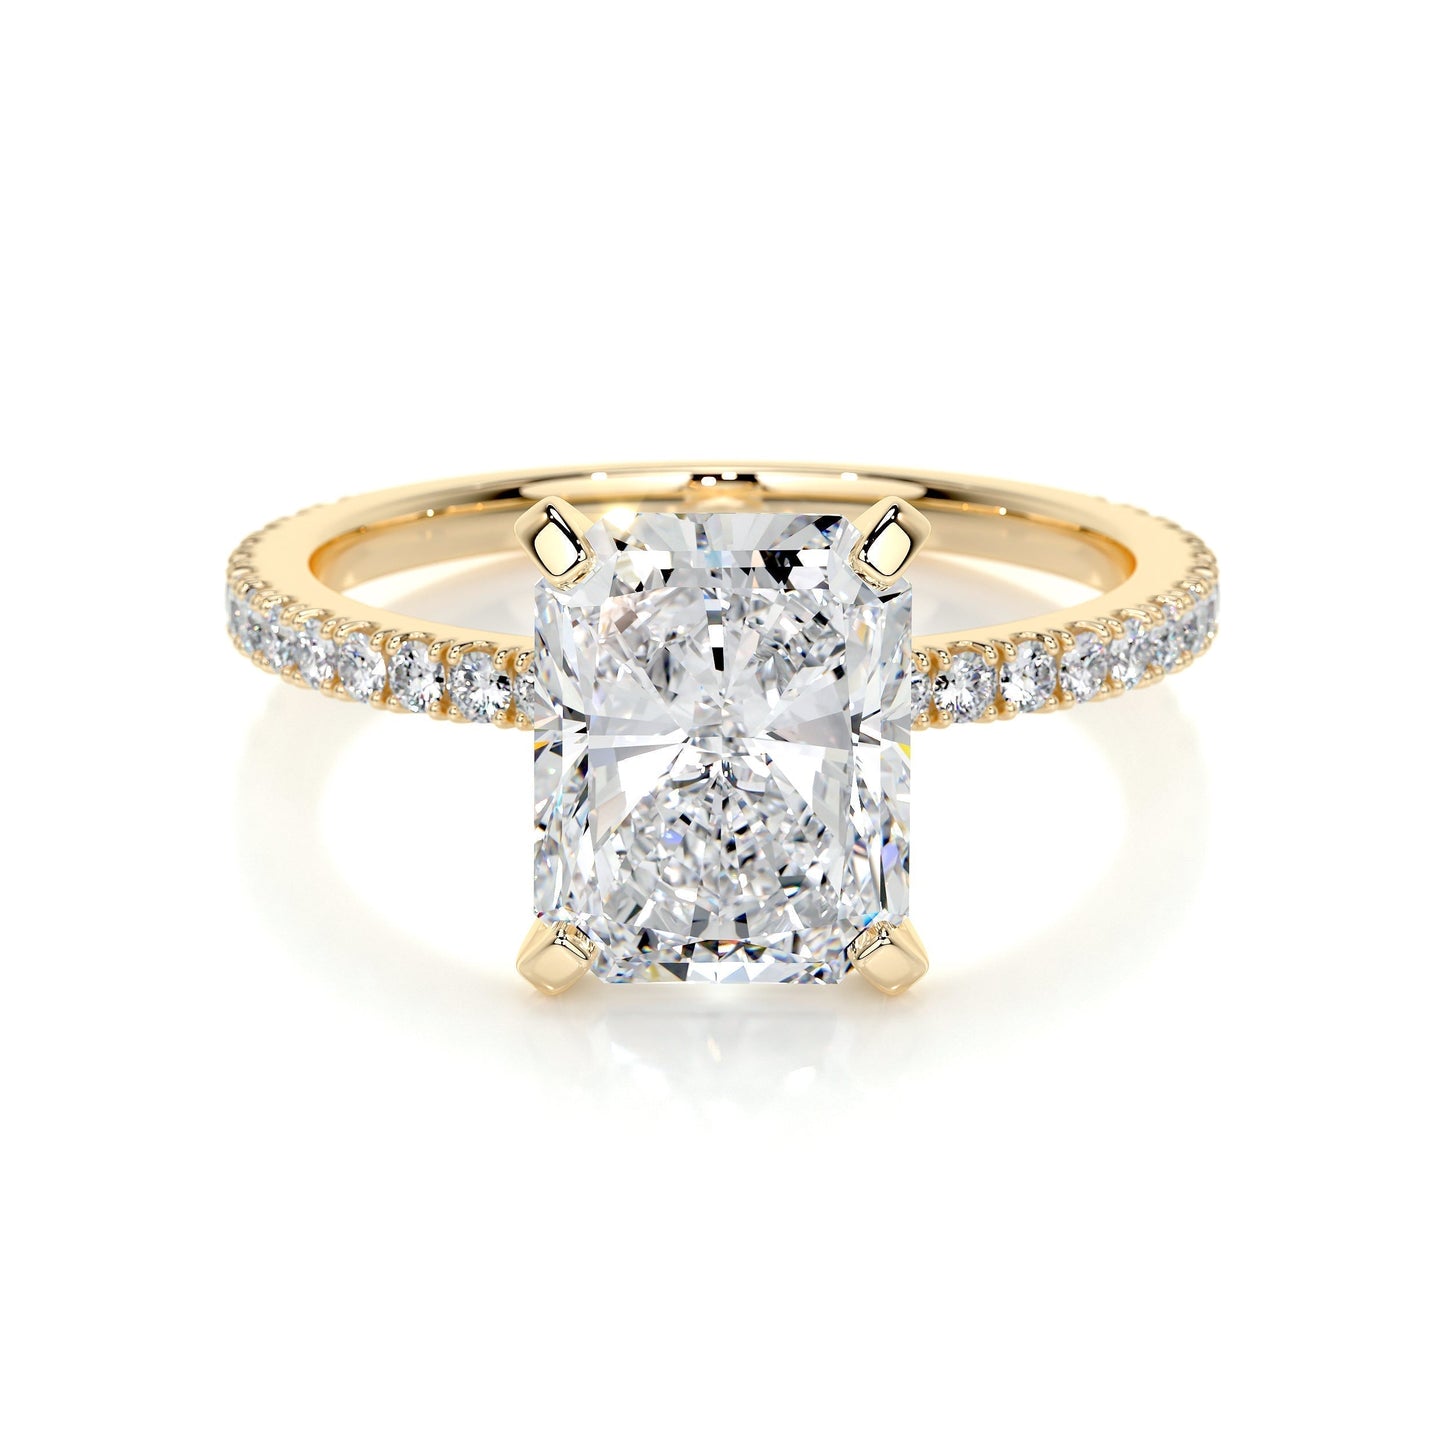 3.0 CT Radiant Solitaire CVD G/SI1 Diamond Engagement Ring 5